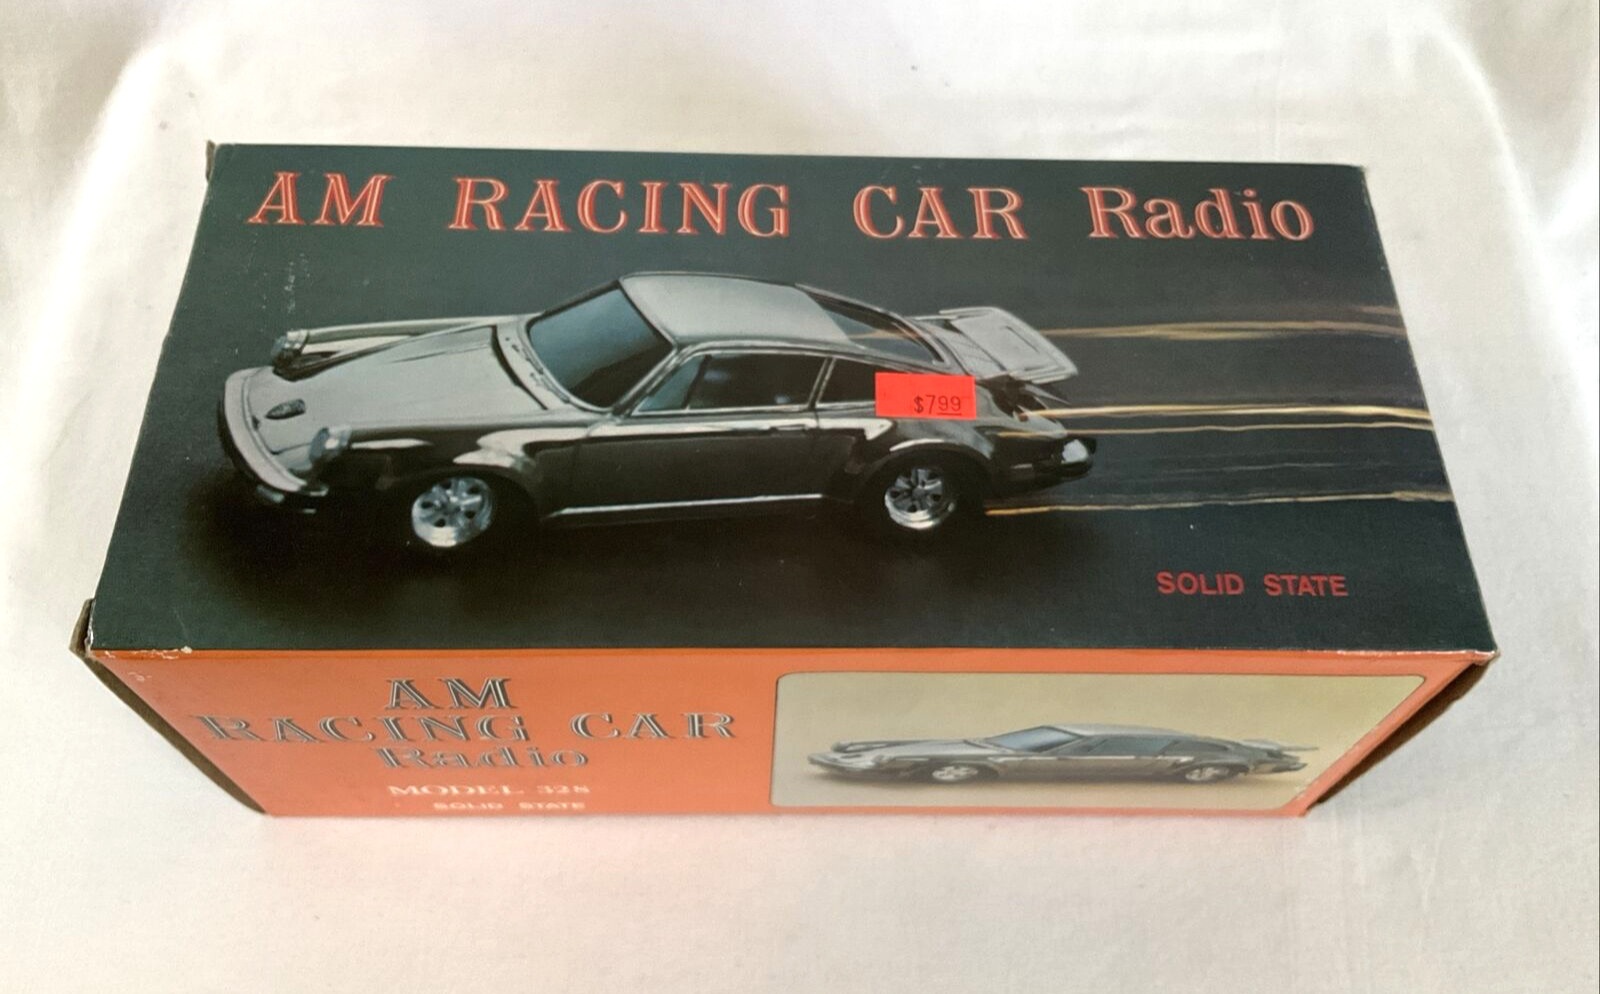 AM Radio Racing Car Porsche Model 328 Vintage - Brand New In Box - Not tested.